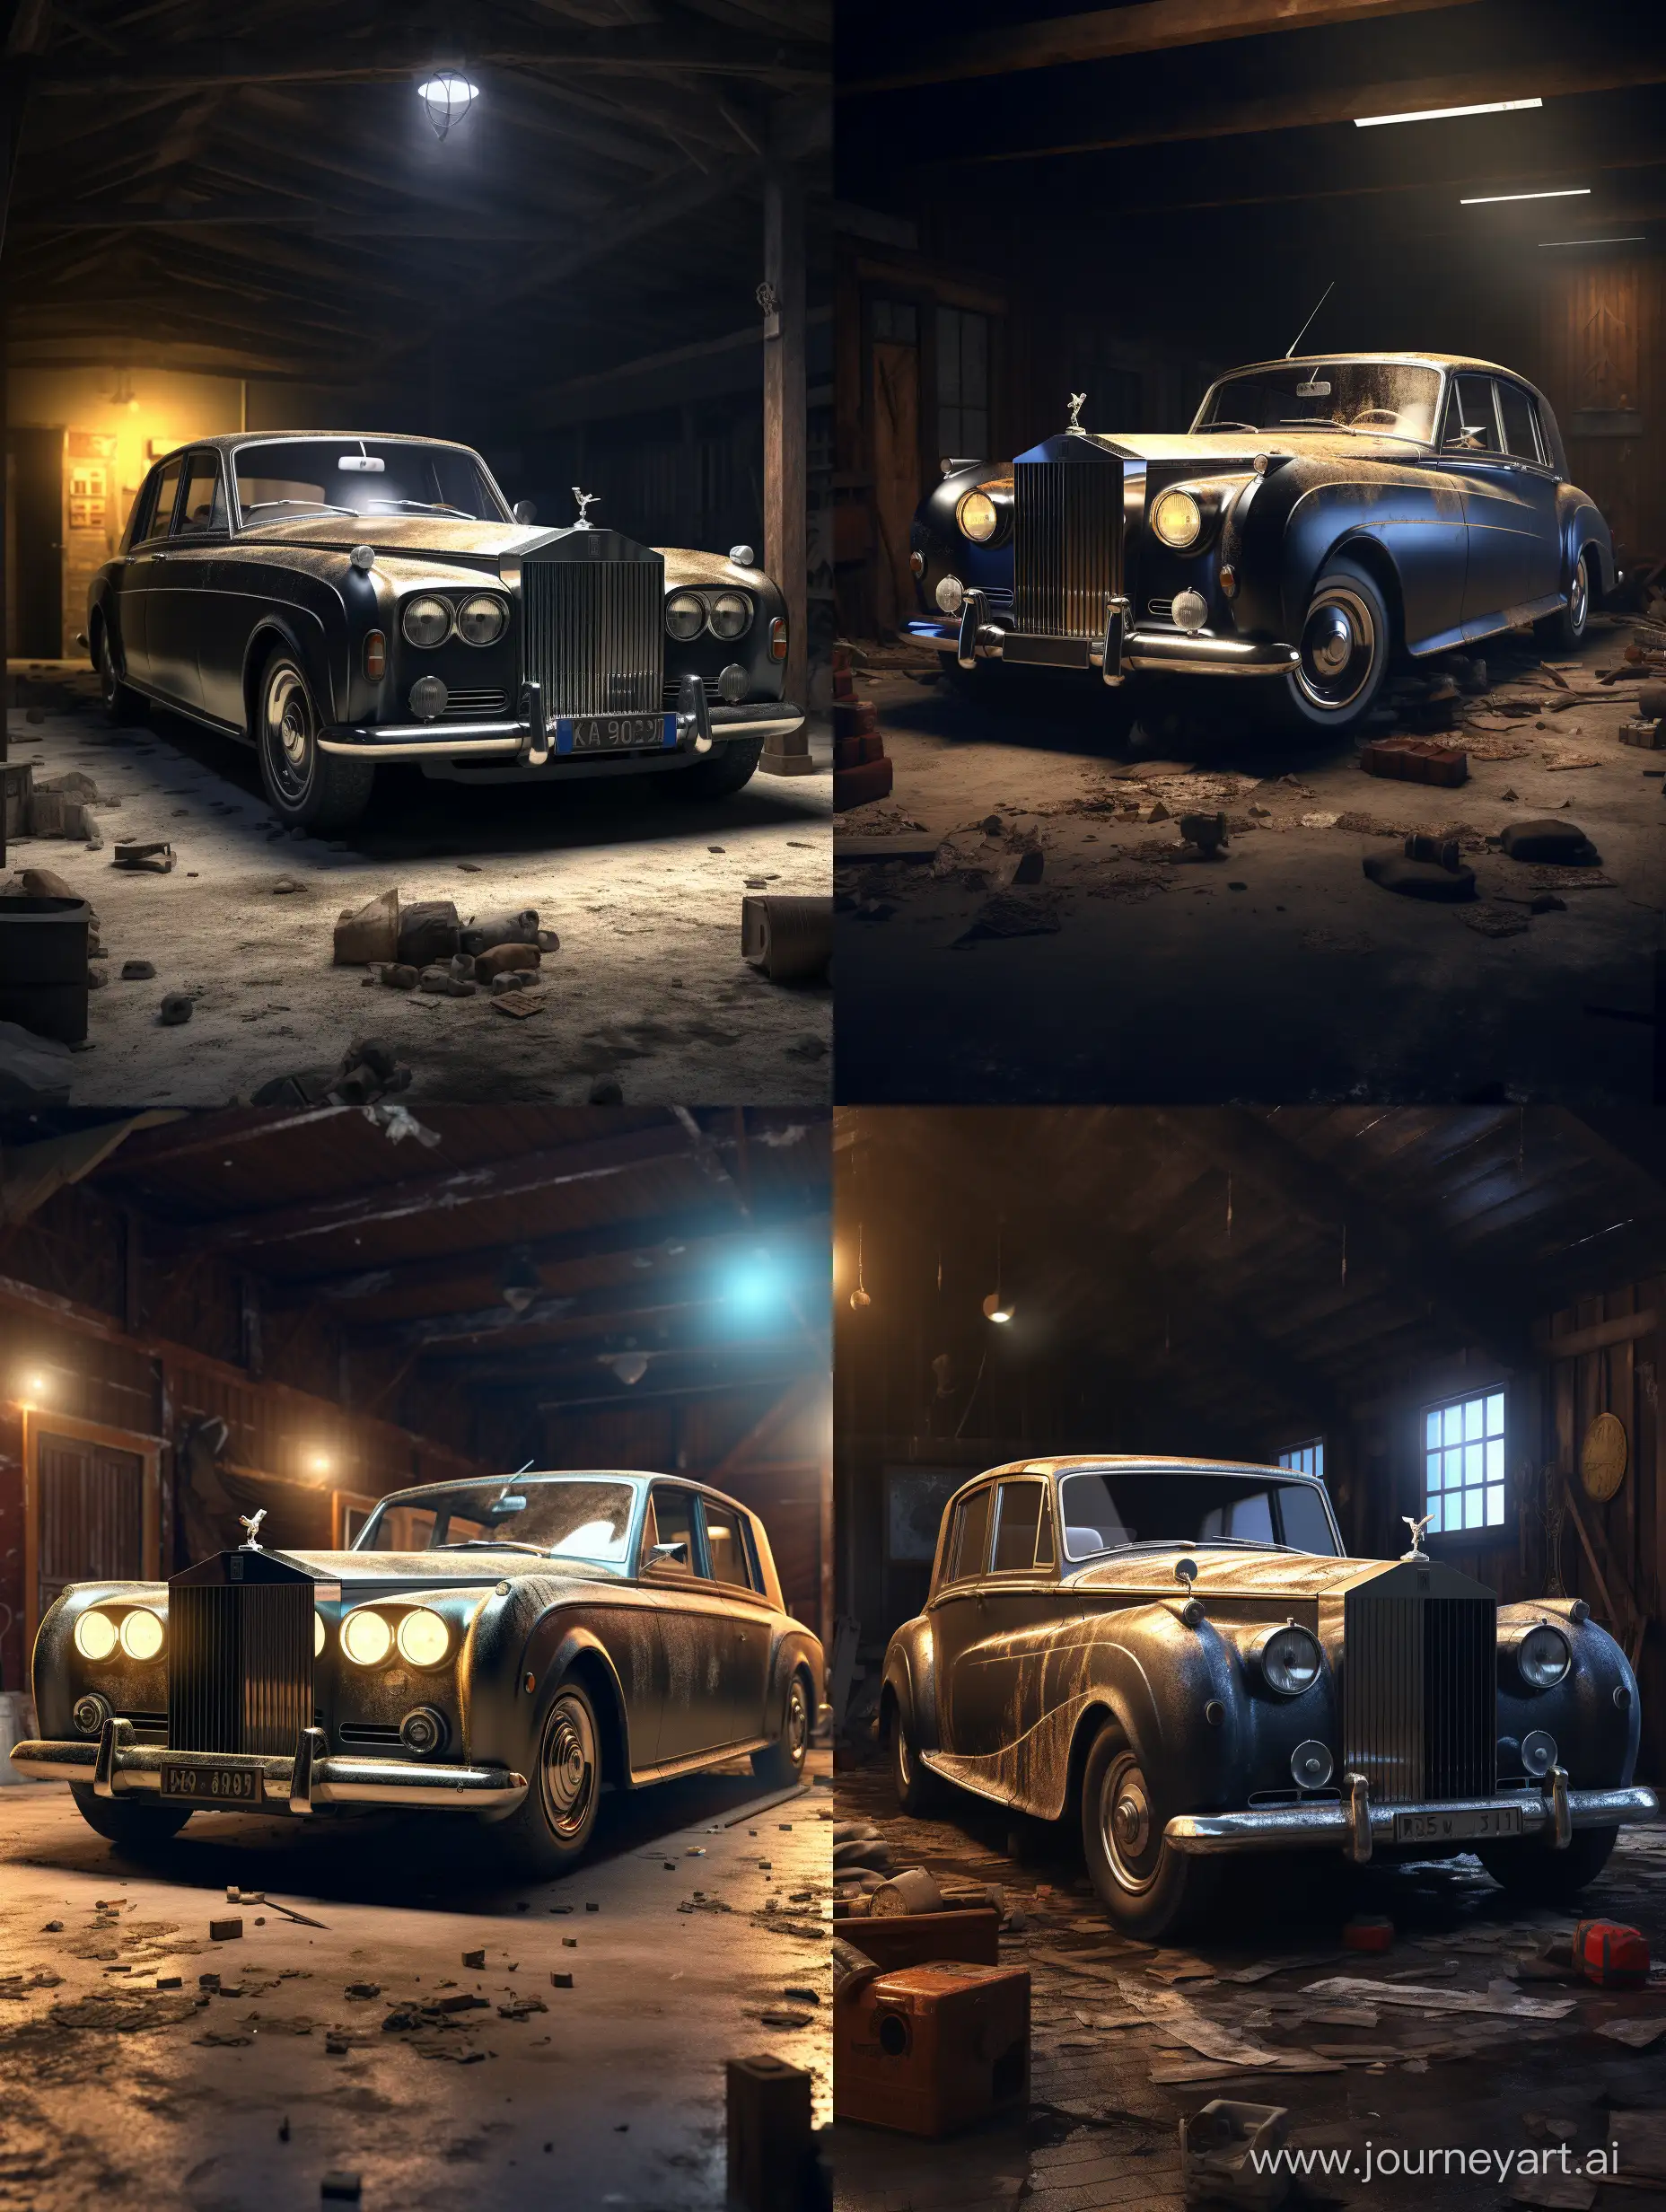 Abandoned-Vintage-RollsRoyce-in-Dusty-Garage-with-Cinematic-Detail